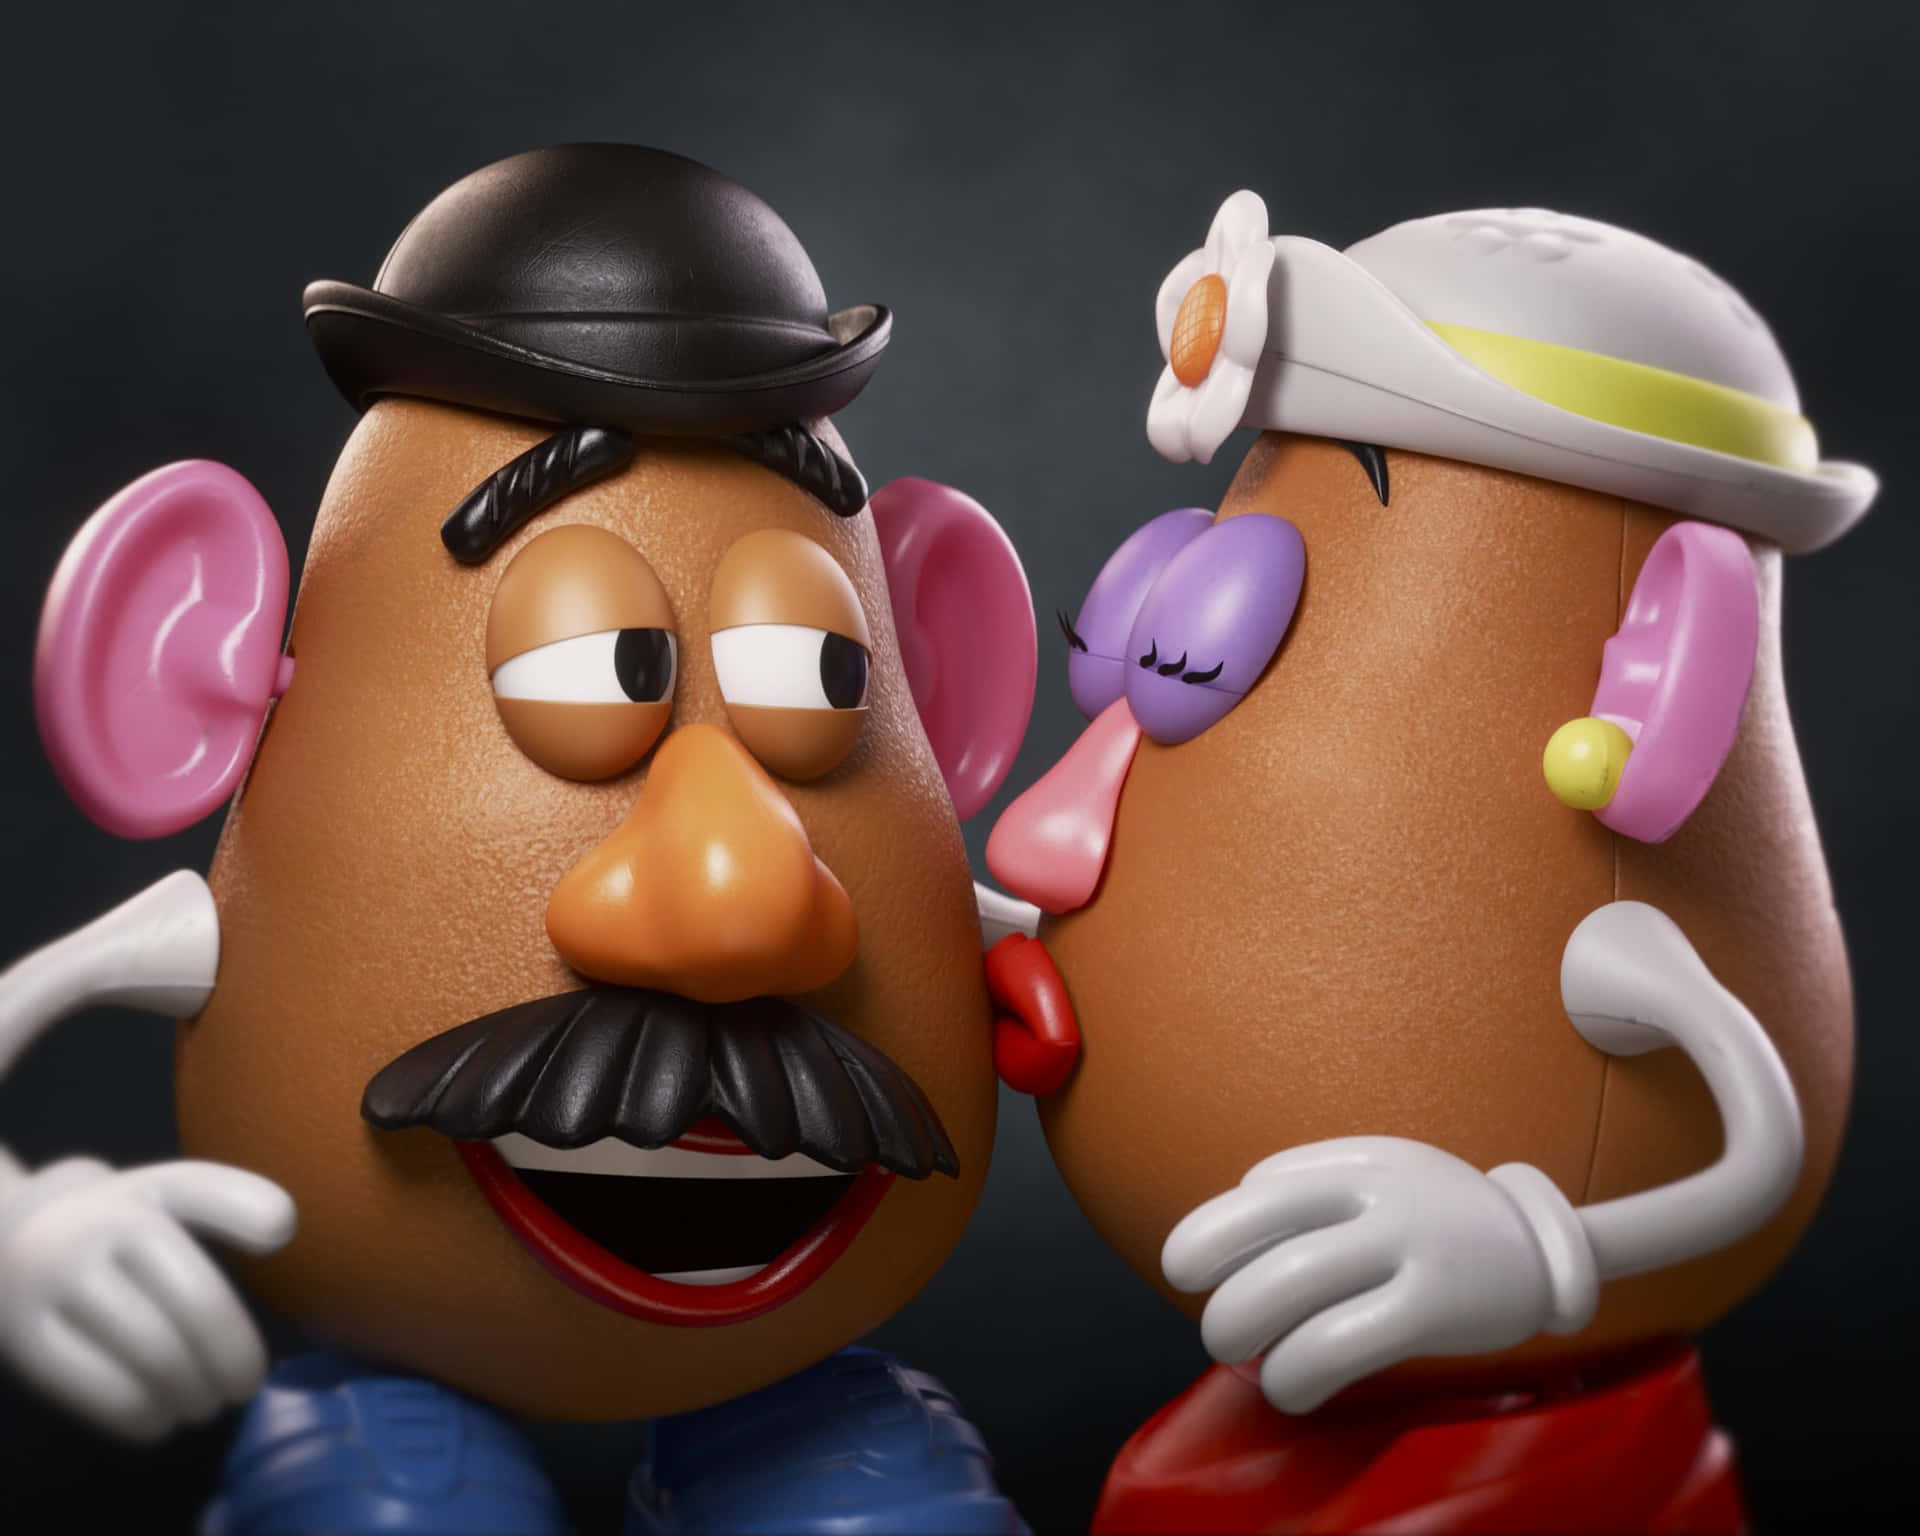 Let's Have Fun with Mr. Potato Head!